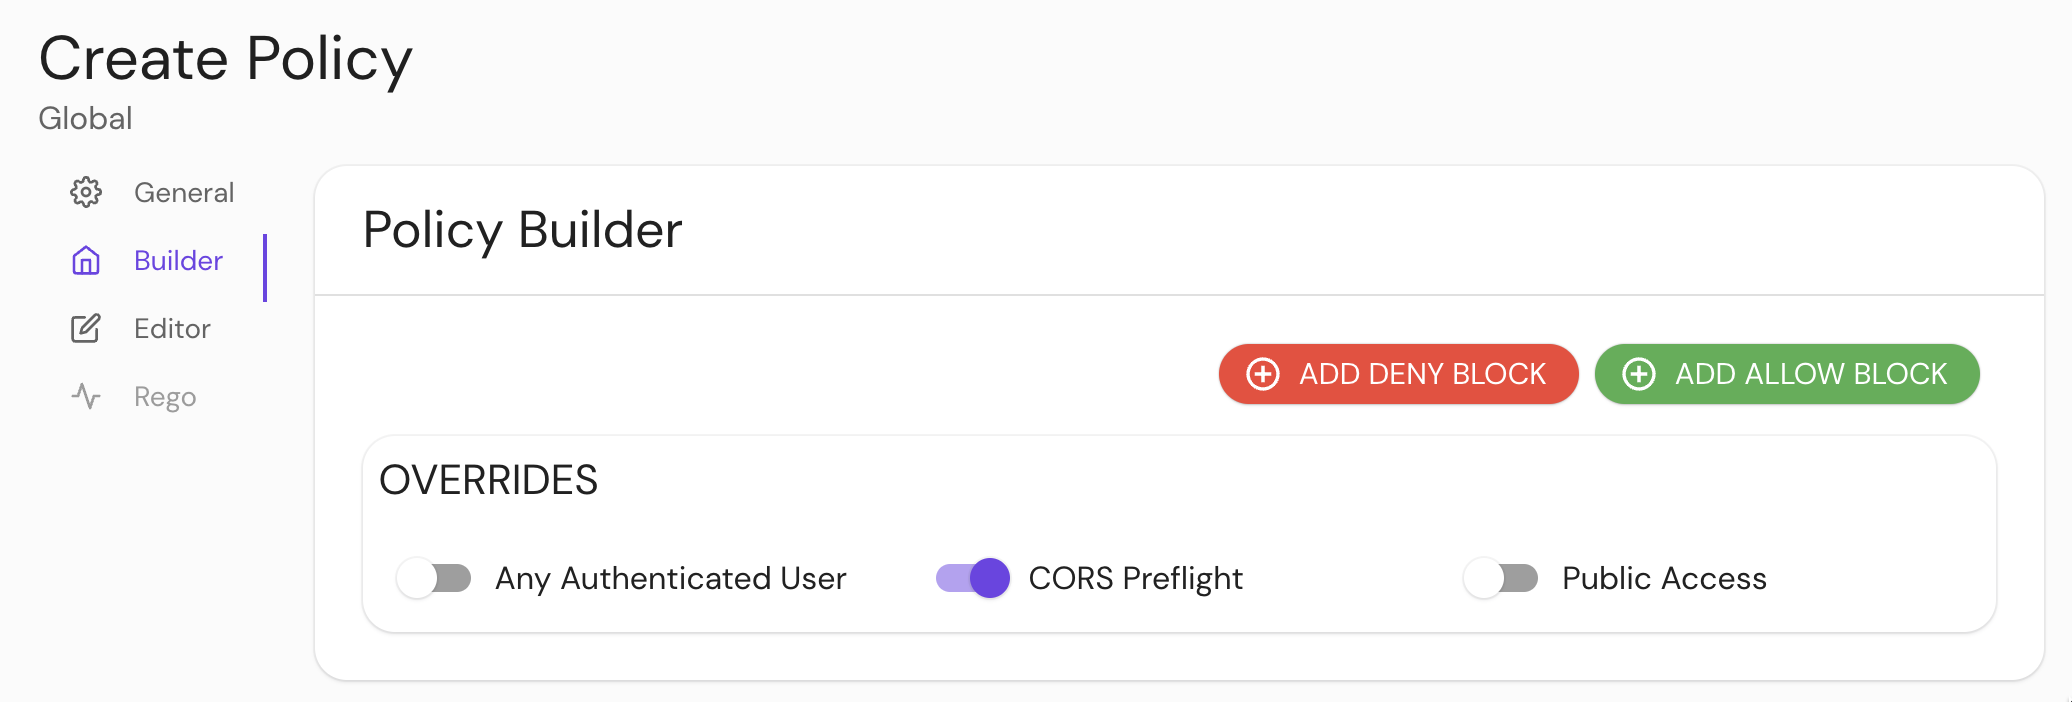 enable cors preflight in the console